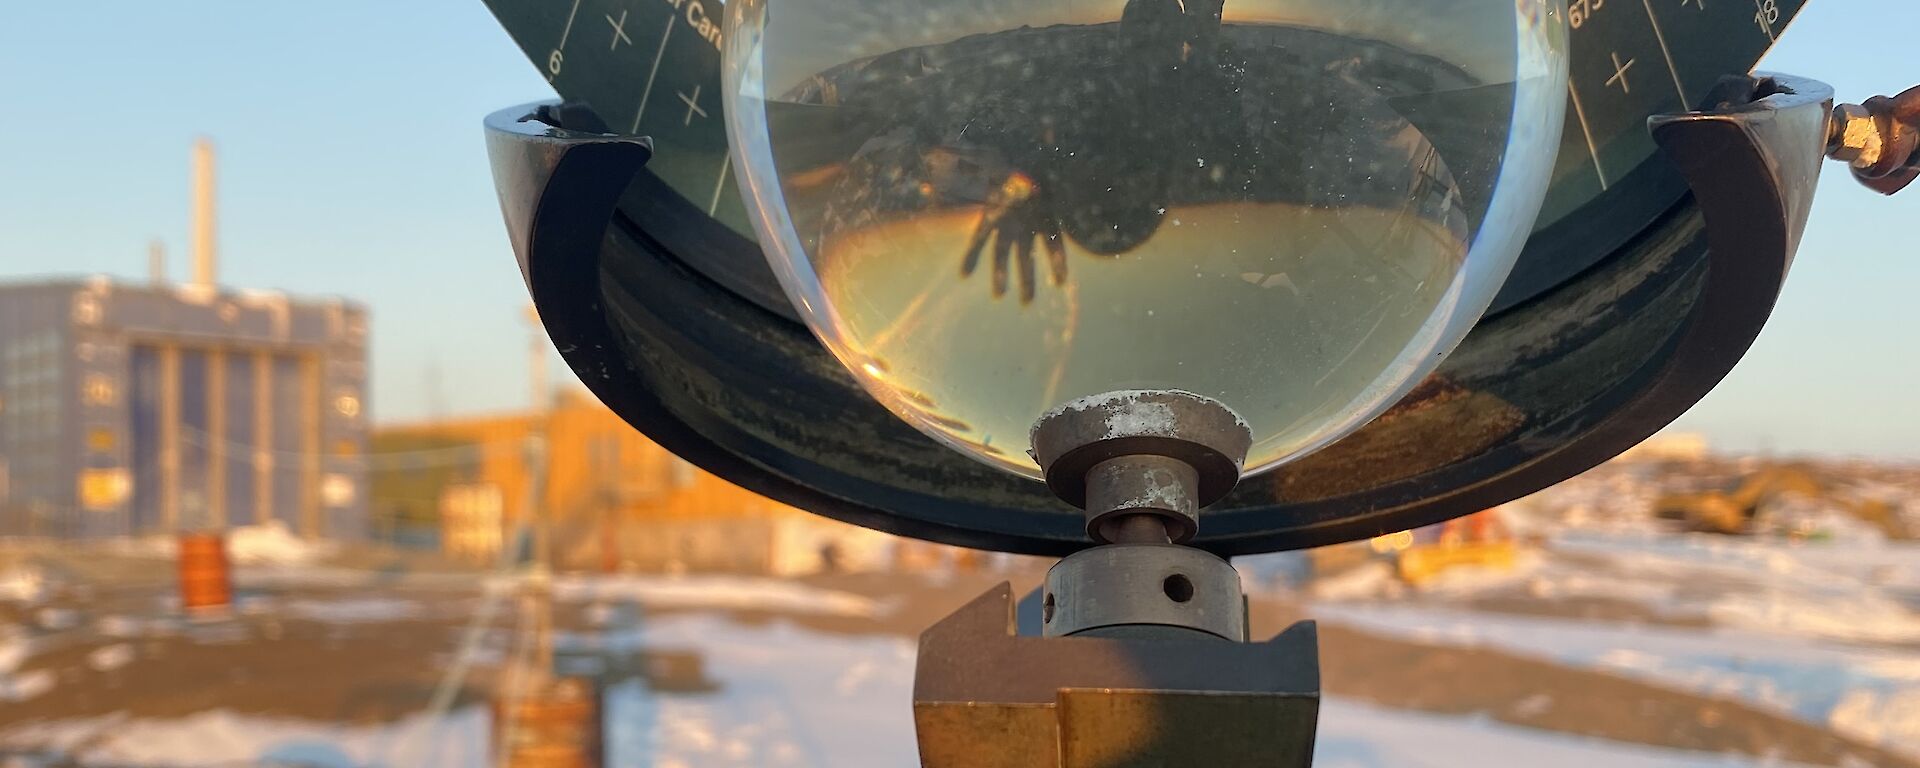 A Campbell-Stokes sunshine recorder glass sphere shows the reflection and refracted image of a person waving and a sunset. There is a blue building and snow covered rocky land in the background.